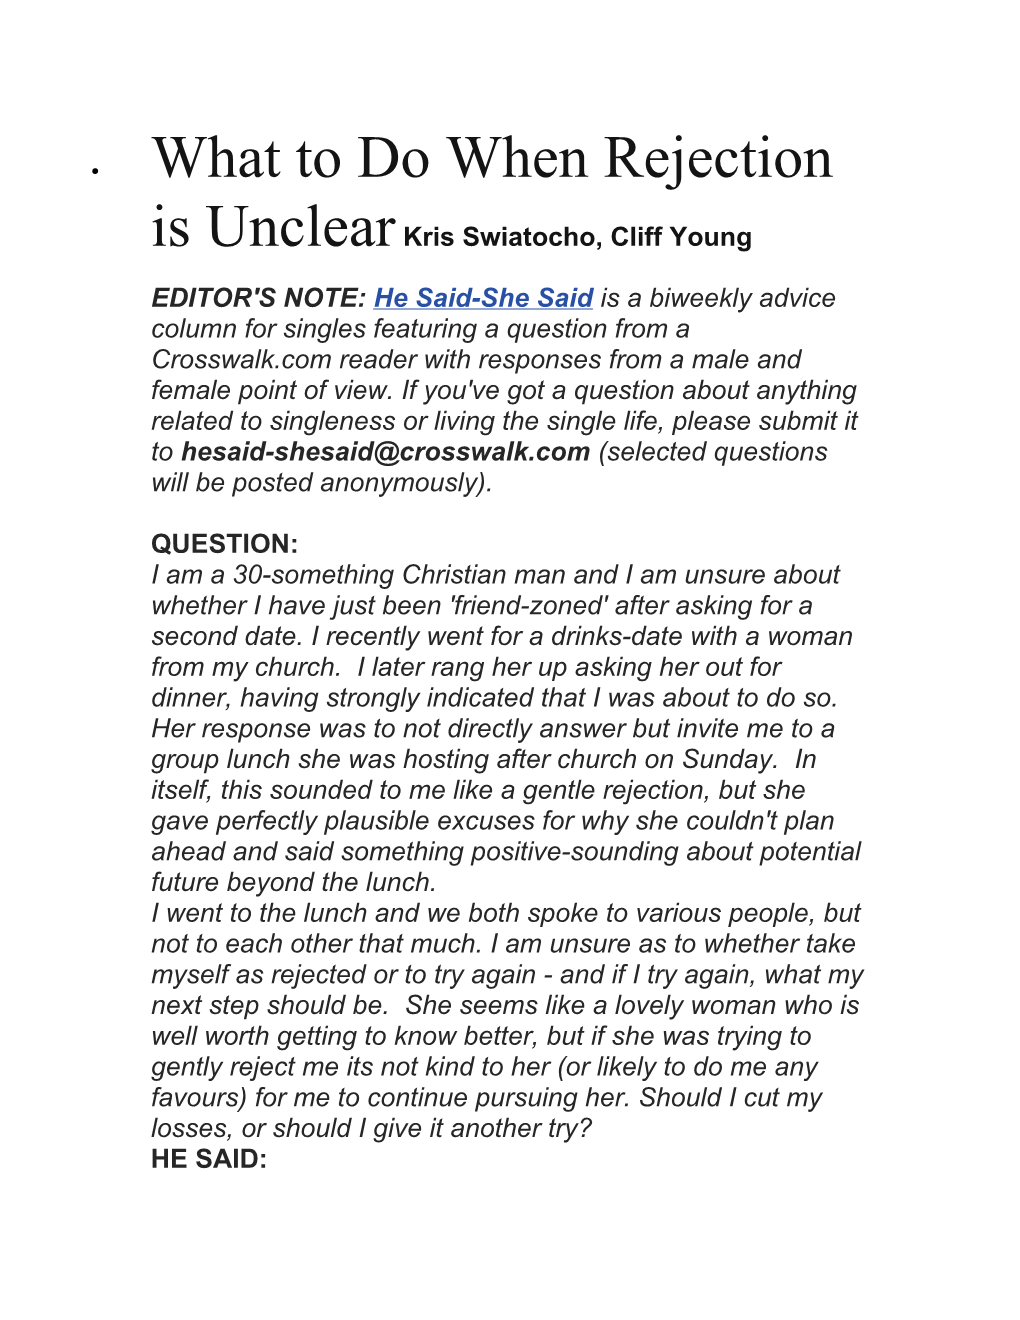 What to Do When Rejection Is Unclear Kris Swiatocho, Cliff Young